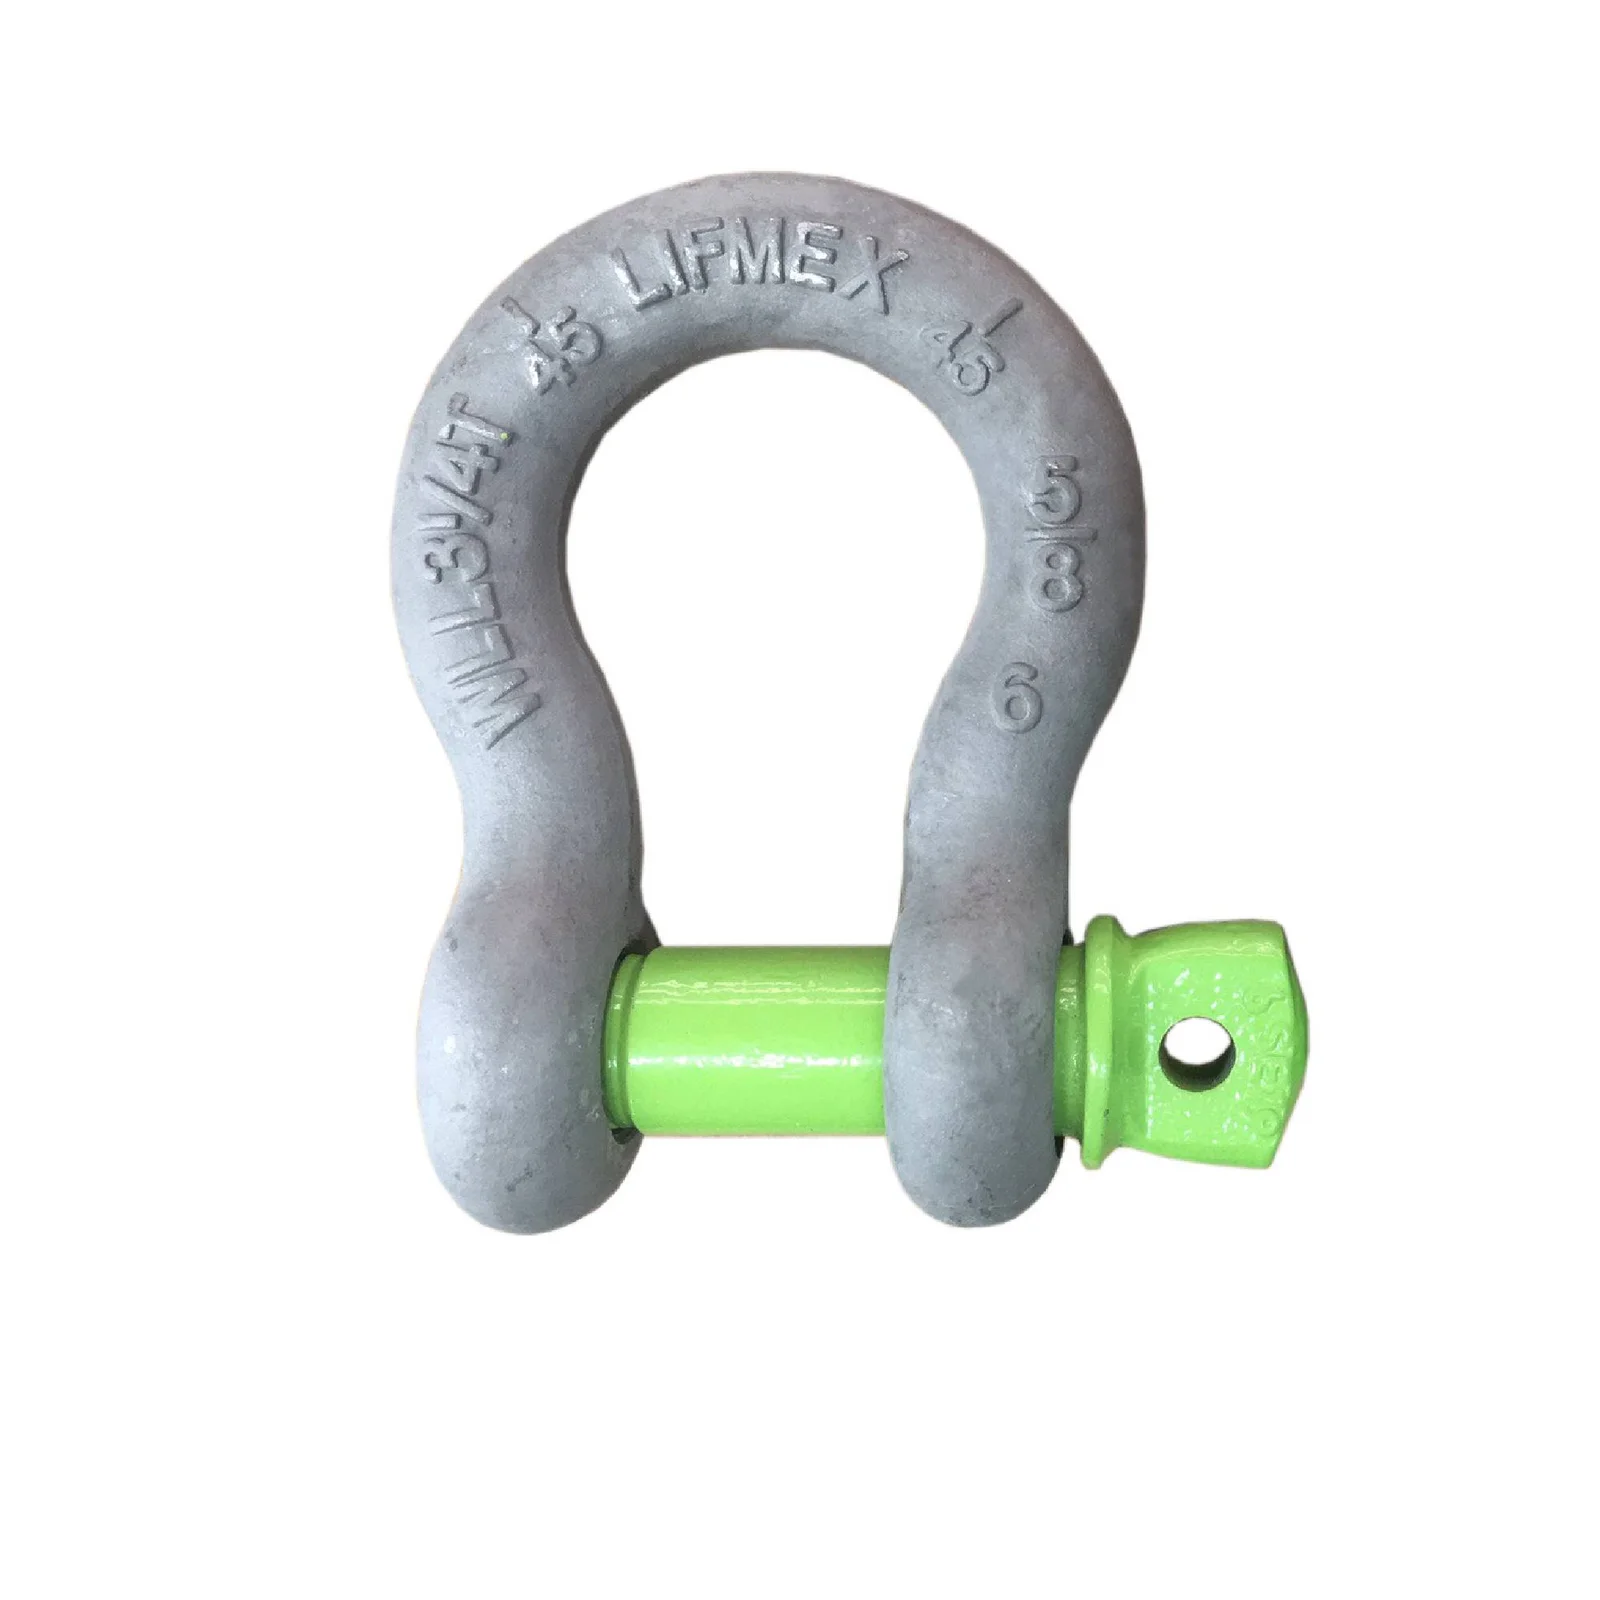 Bow Shackle Bow shackle suppliers in UAE and dubai